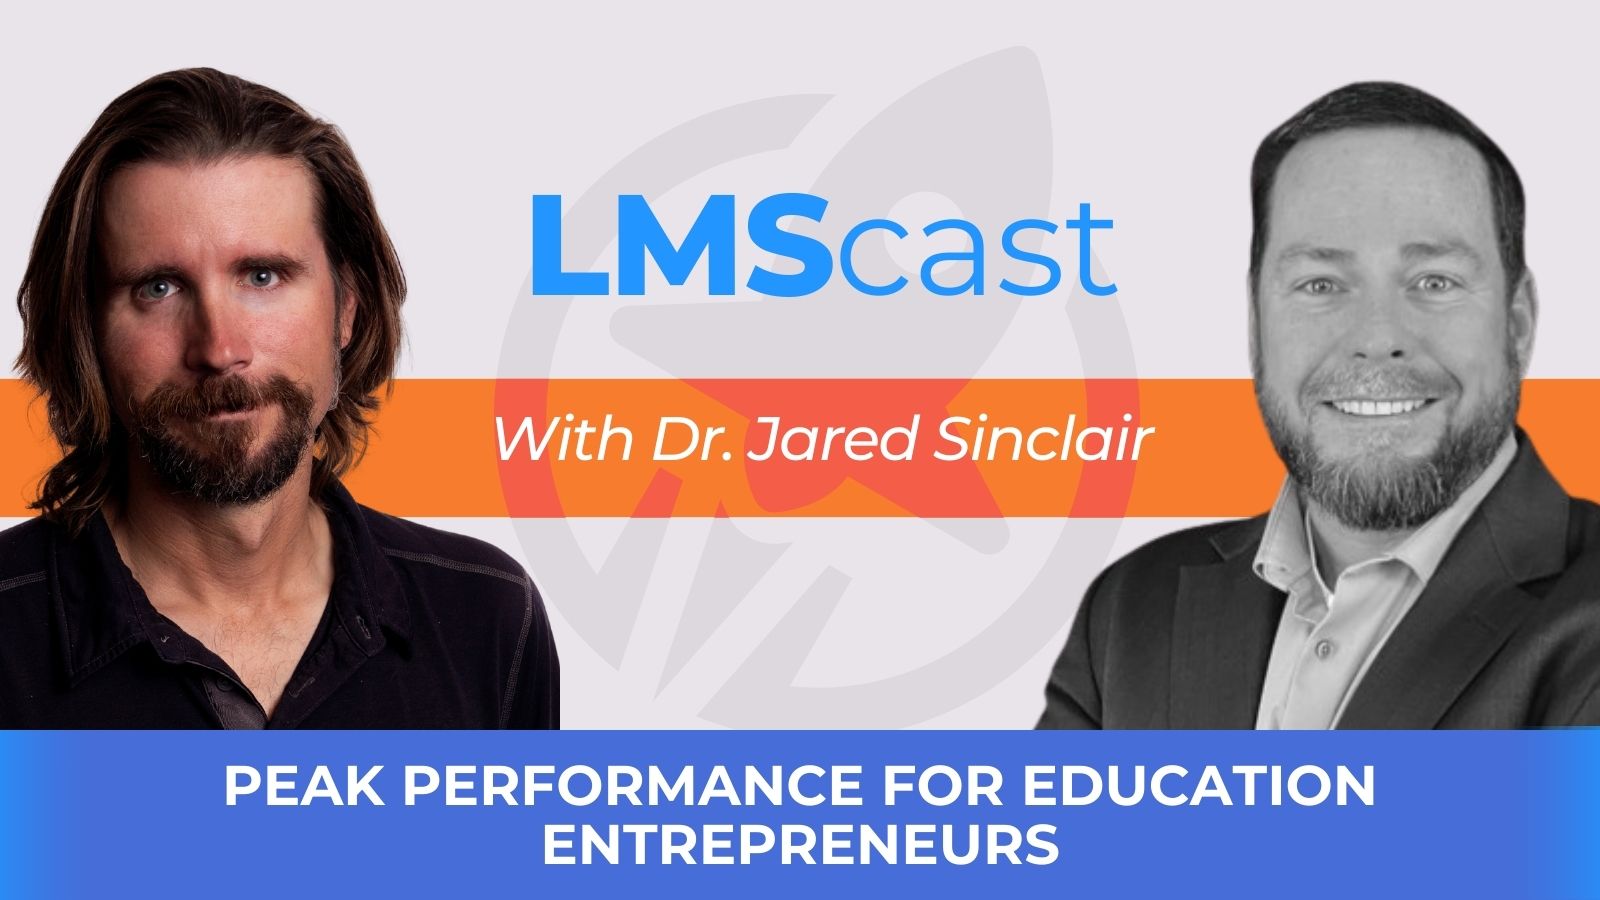 Peak Performance for Education Entrepreneurs with Dr. Jared Sinclair